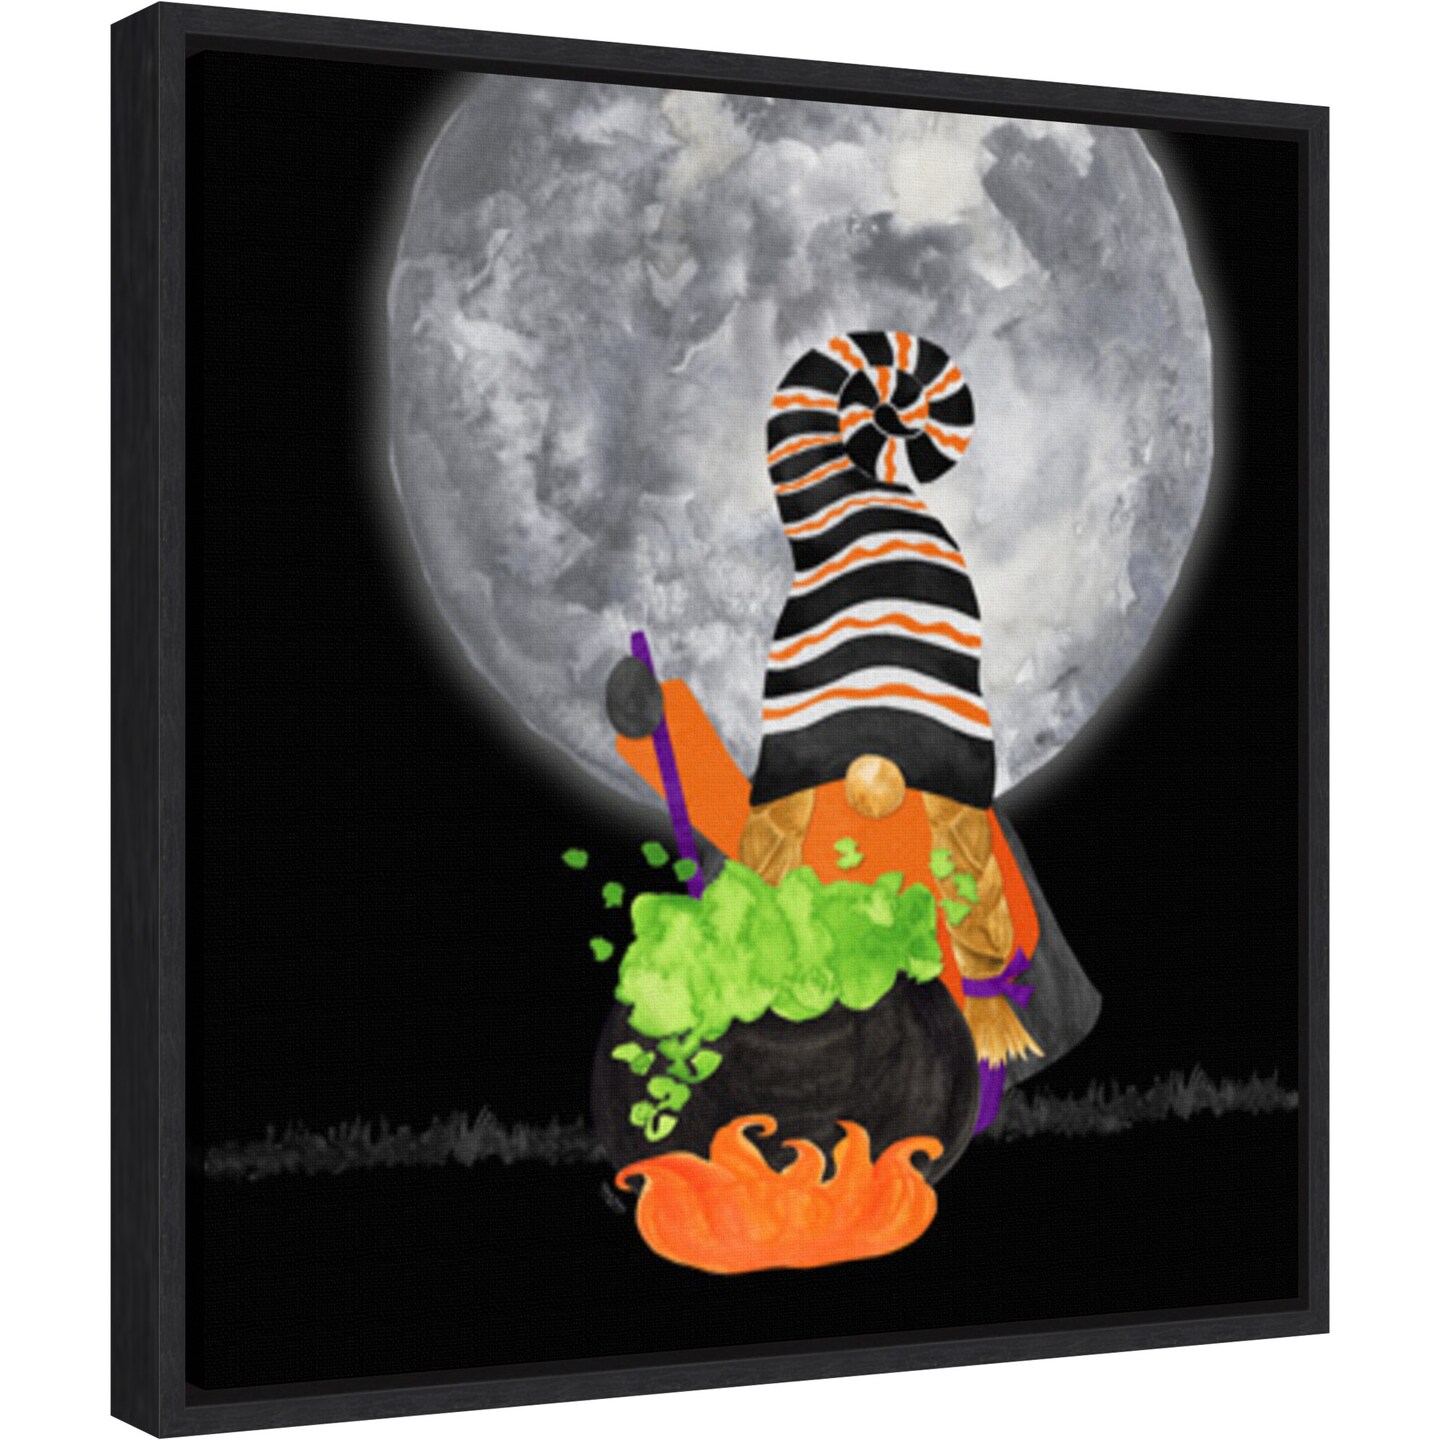 Gnomes of Halloween IV-Cauldron by Tara Reed 16-in. W x 16-in. H. Canvas Wall Art Print Framed in Black